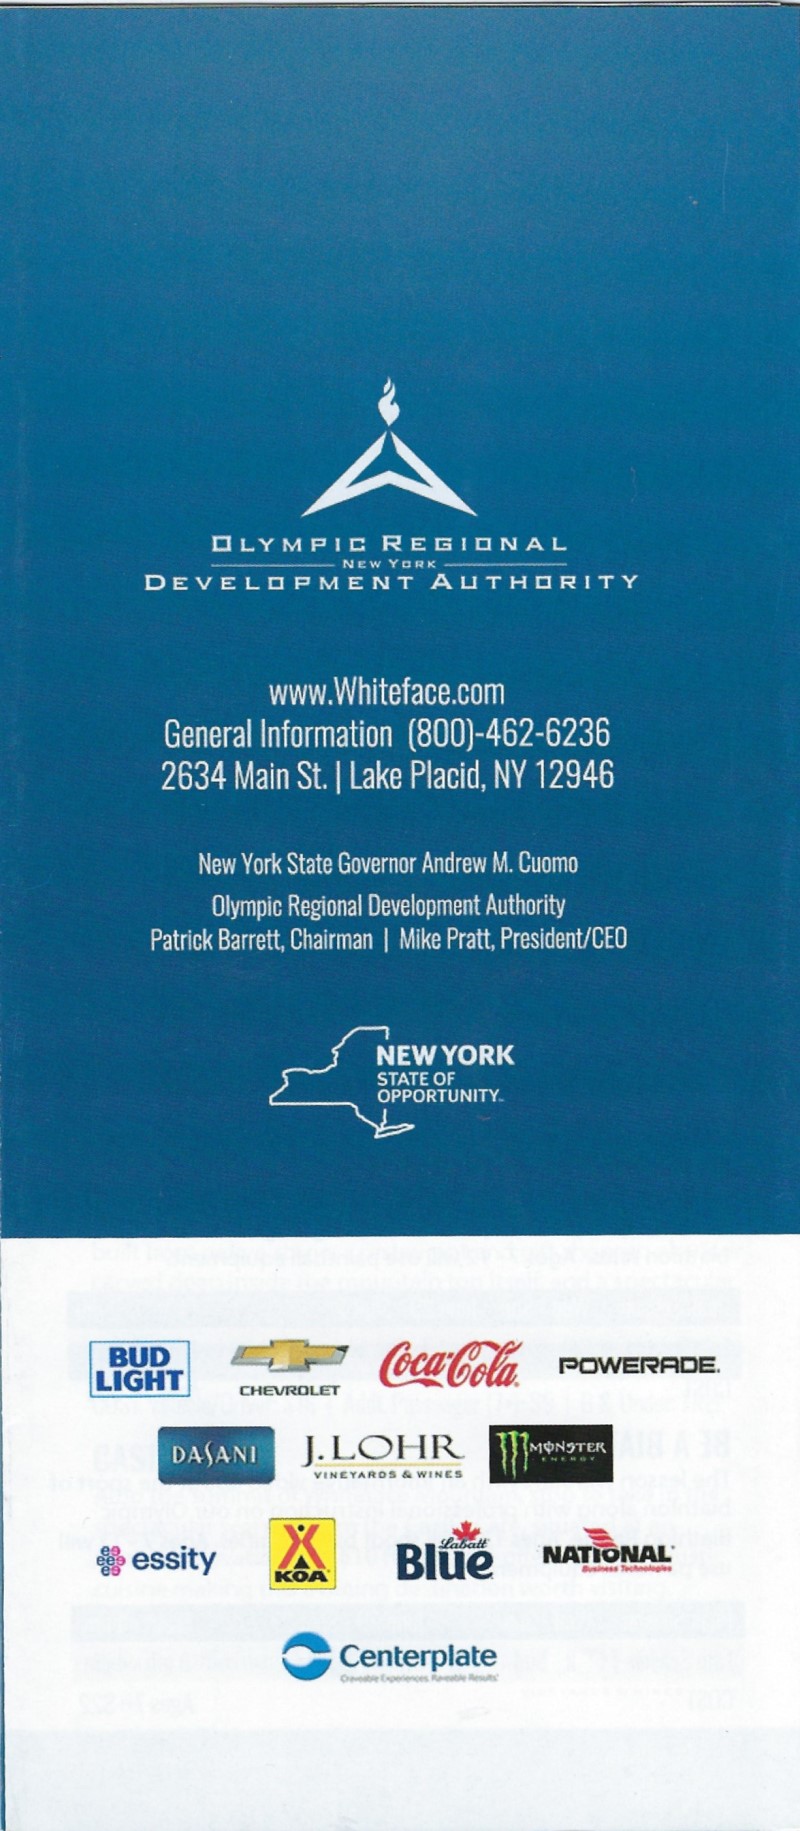 Olympic Sites Events & Activities Whiteface Lake Placid brochure thumbnail